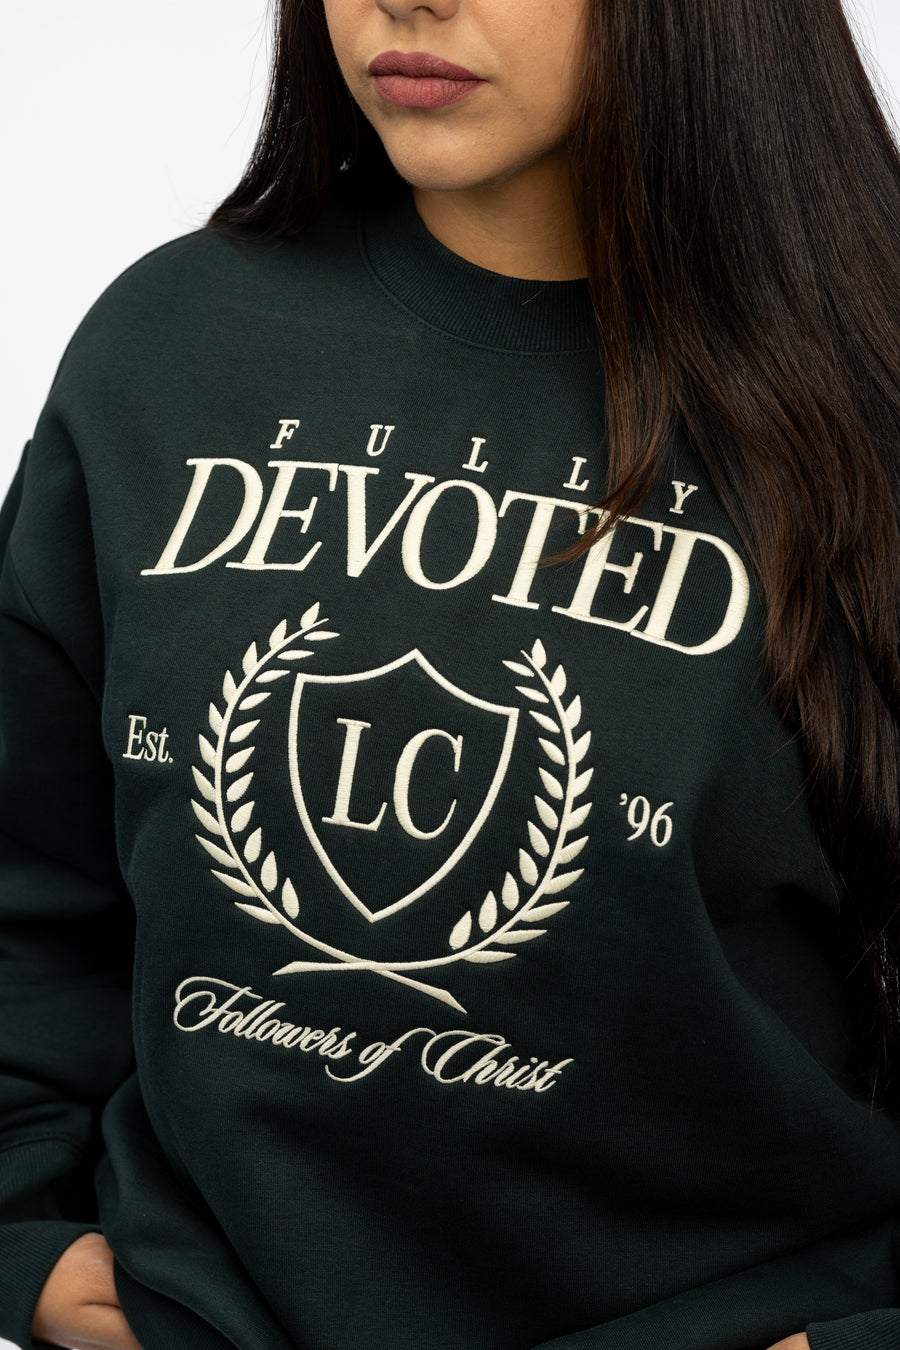 Embroidered Fully Devoted Crest Sweatshirt